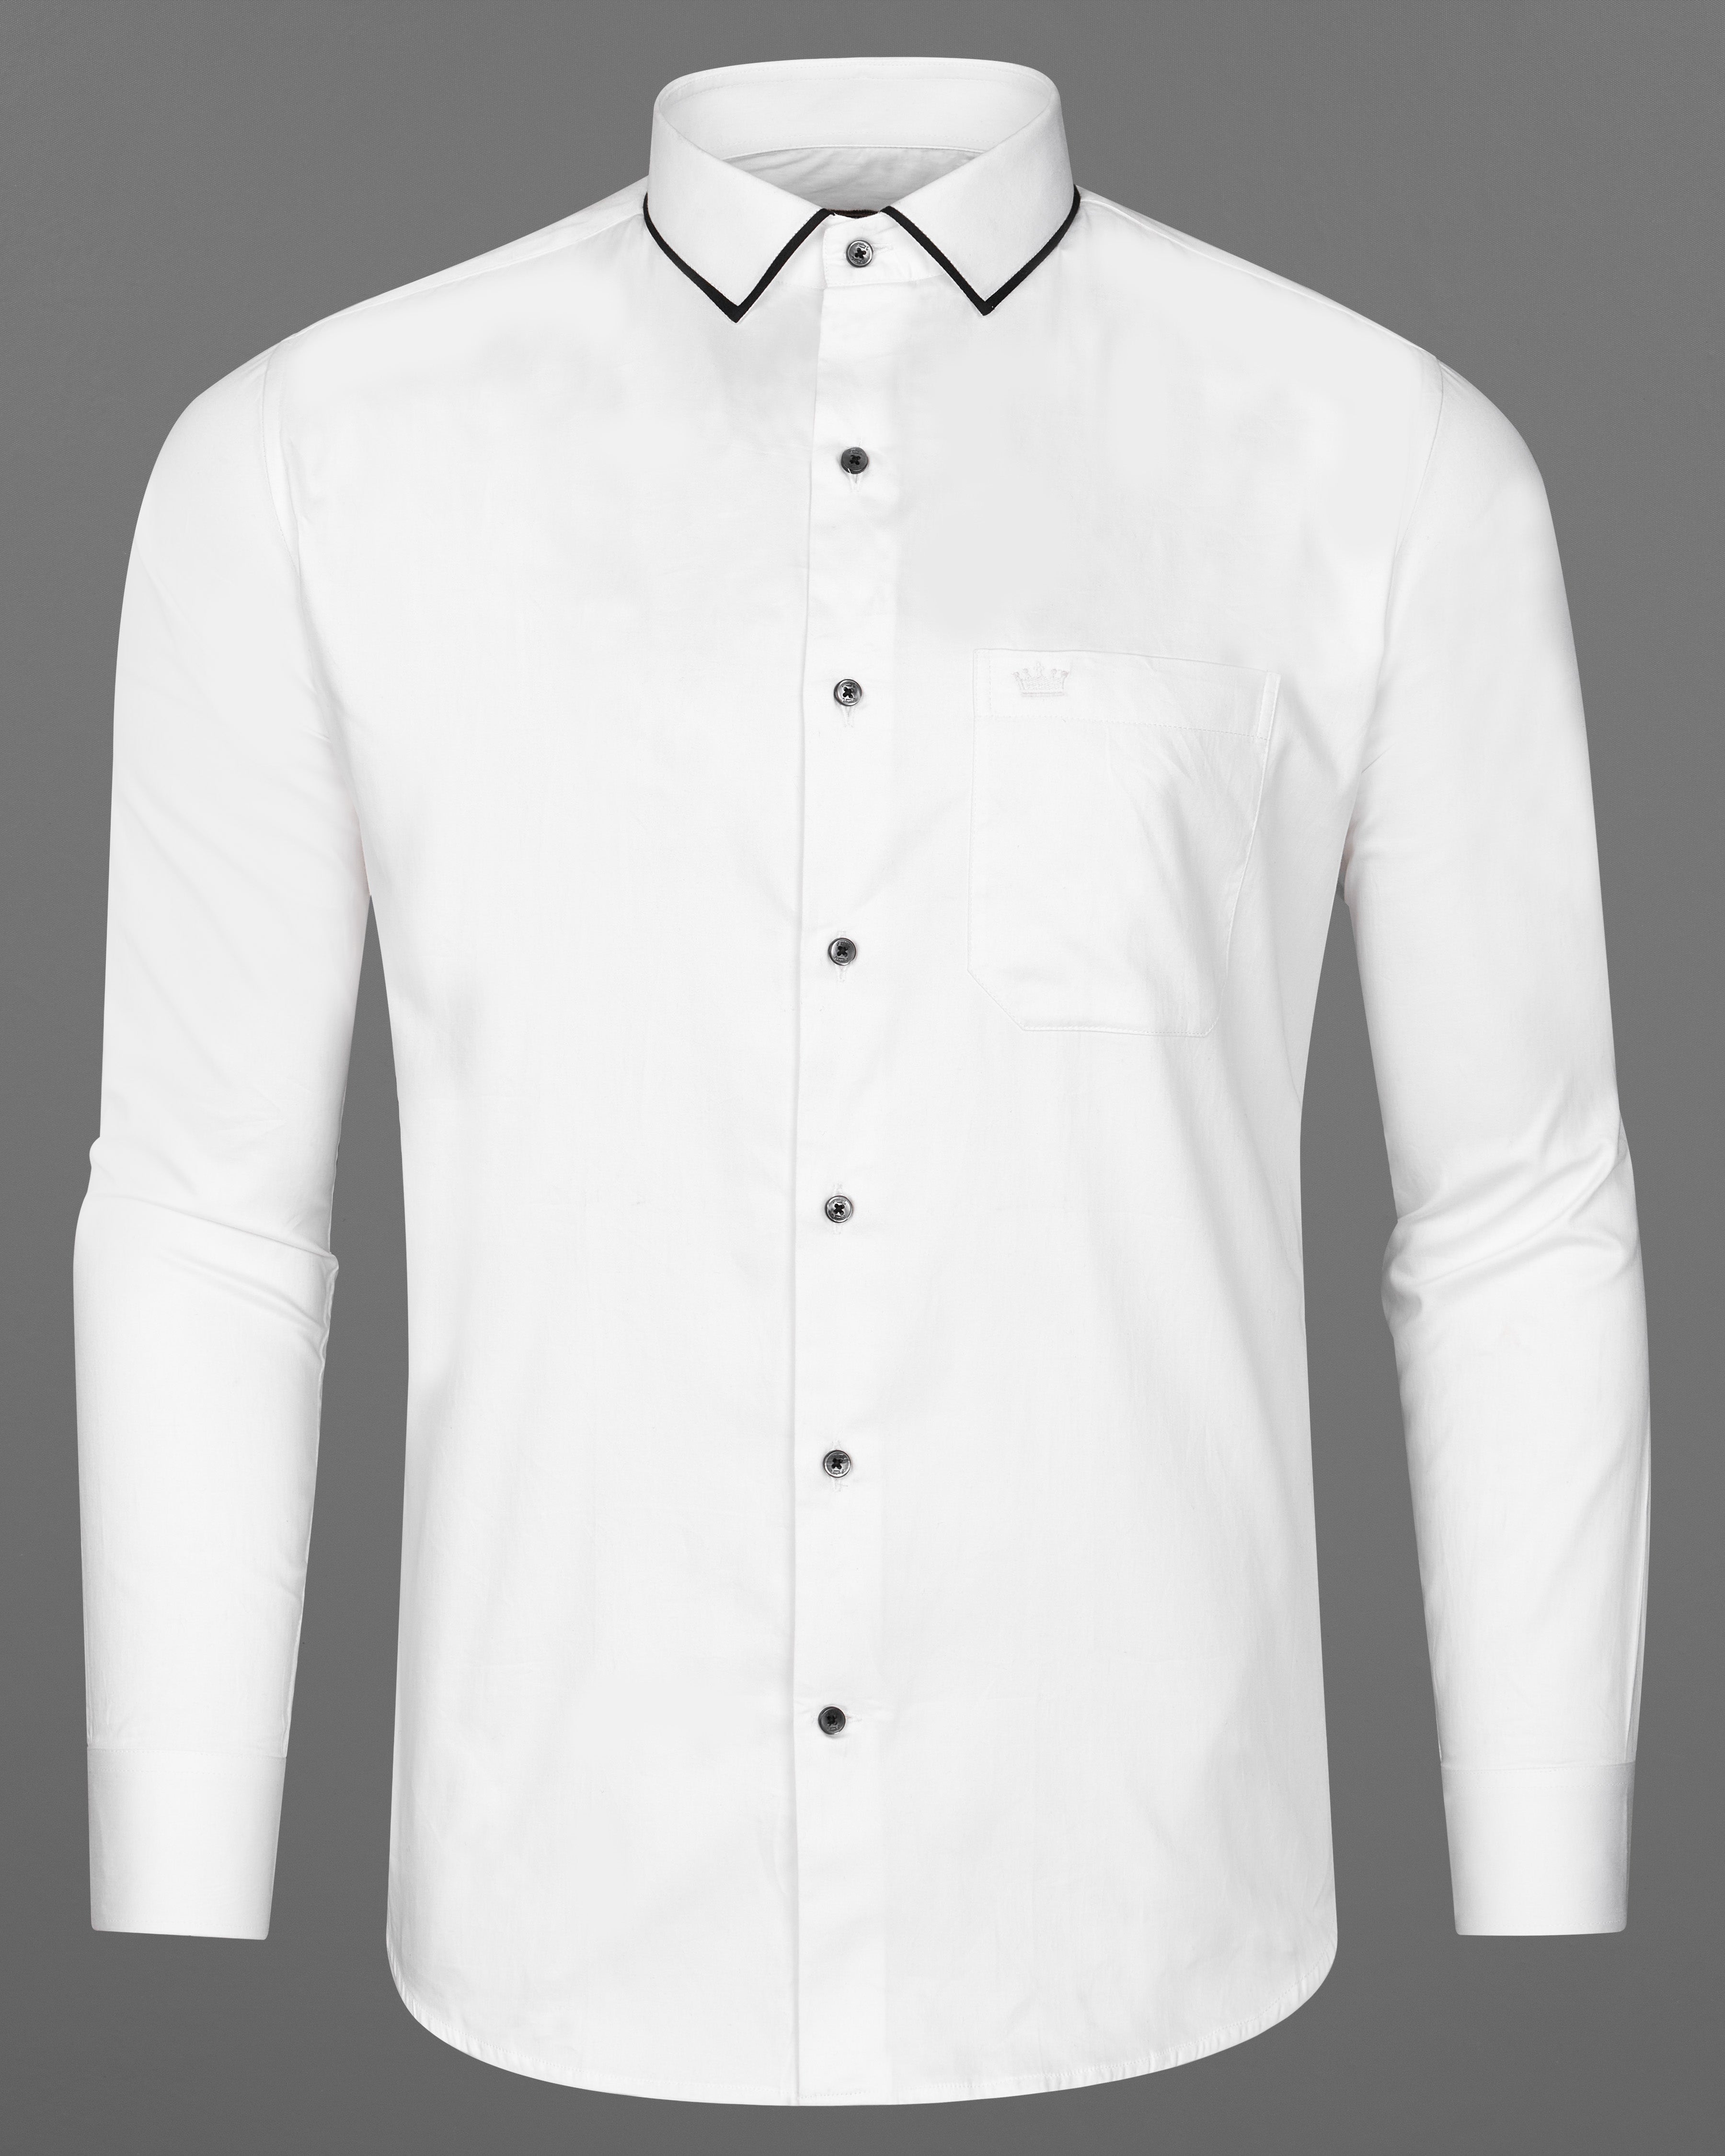 Bright White Subtle Sheen With Collar Detail Giza Cotton Shirt 3075CA-BLK-P14-38, 3075CA-BLK-P14-H-38, 3075CA-BLK-P14-39, 3075CA-BLK-P14-H-39, 3075CA-BLK-P14-40, 3075CA-BLK-P14-H-40, 3075CA-BLK-P14-42, 3075CA-BLK-P14-H-42, 3075CA-BLK-P14-44, 3075CA-BLK-P14-H-44, 3075CA-BLK-P14-46, 3075CA-BLK-P14-H-46, 3075CA-BLK-P14-48, 3075CA-BLK-P14-H-48, 3075CA-BLK-P14-50, 3075CA-BLK-P14-H-50, 3075CA-BLK-P14-52, 3075CA-BLK-P14-H-52